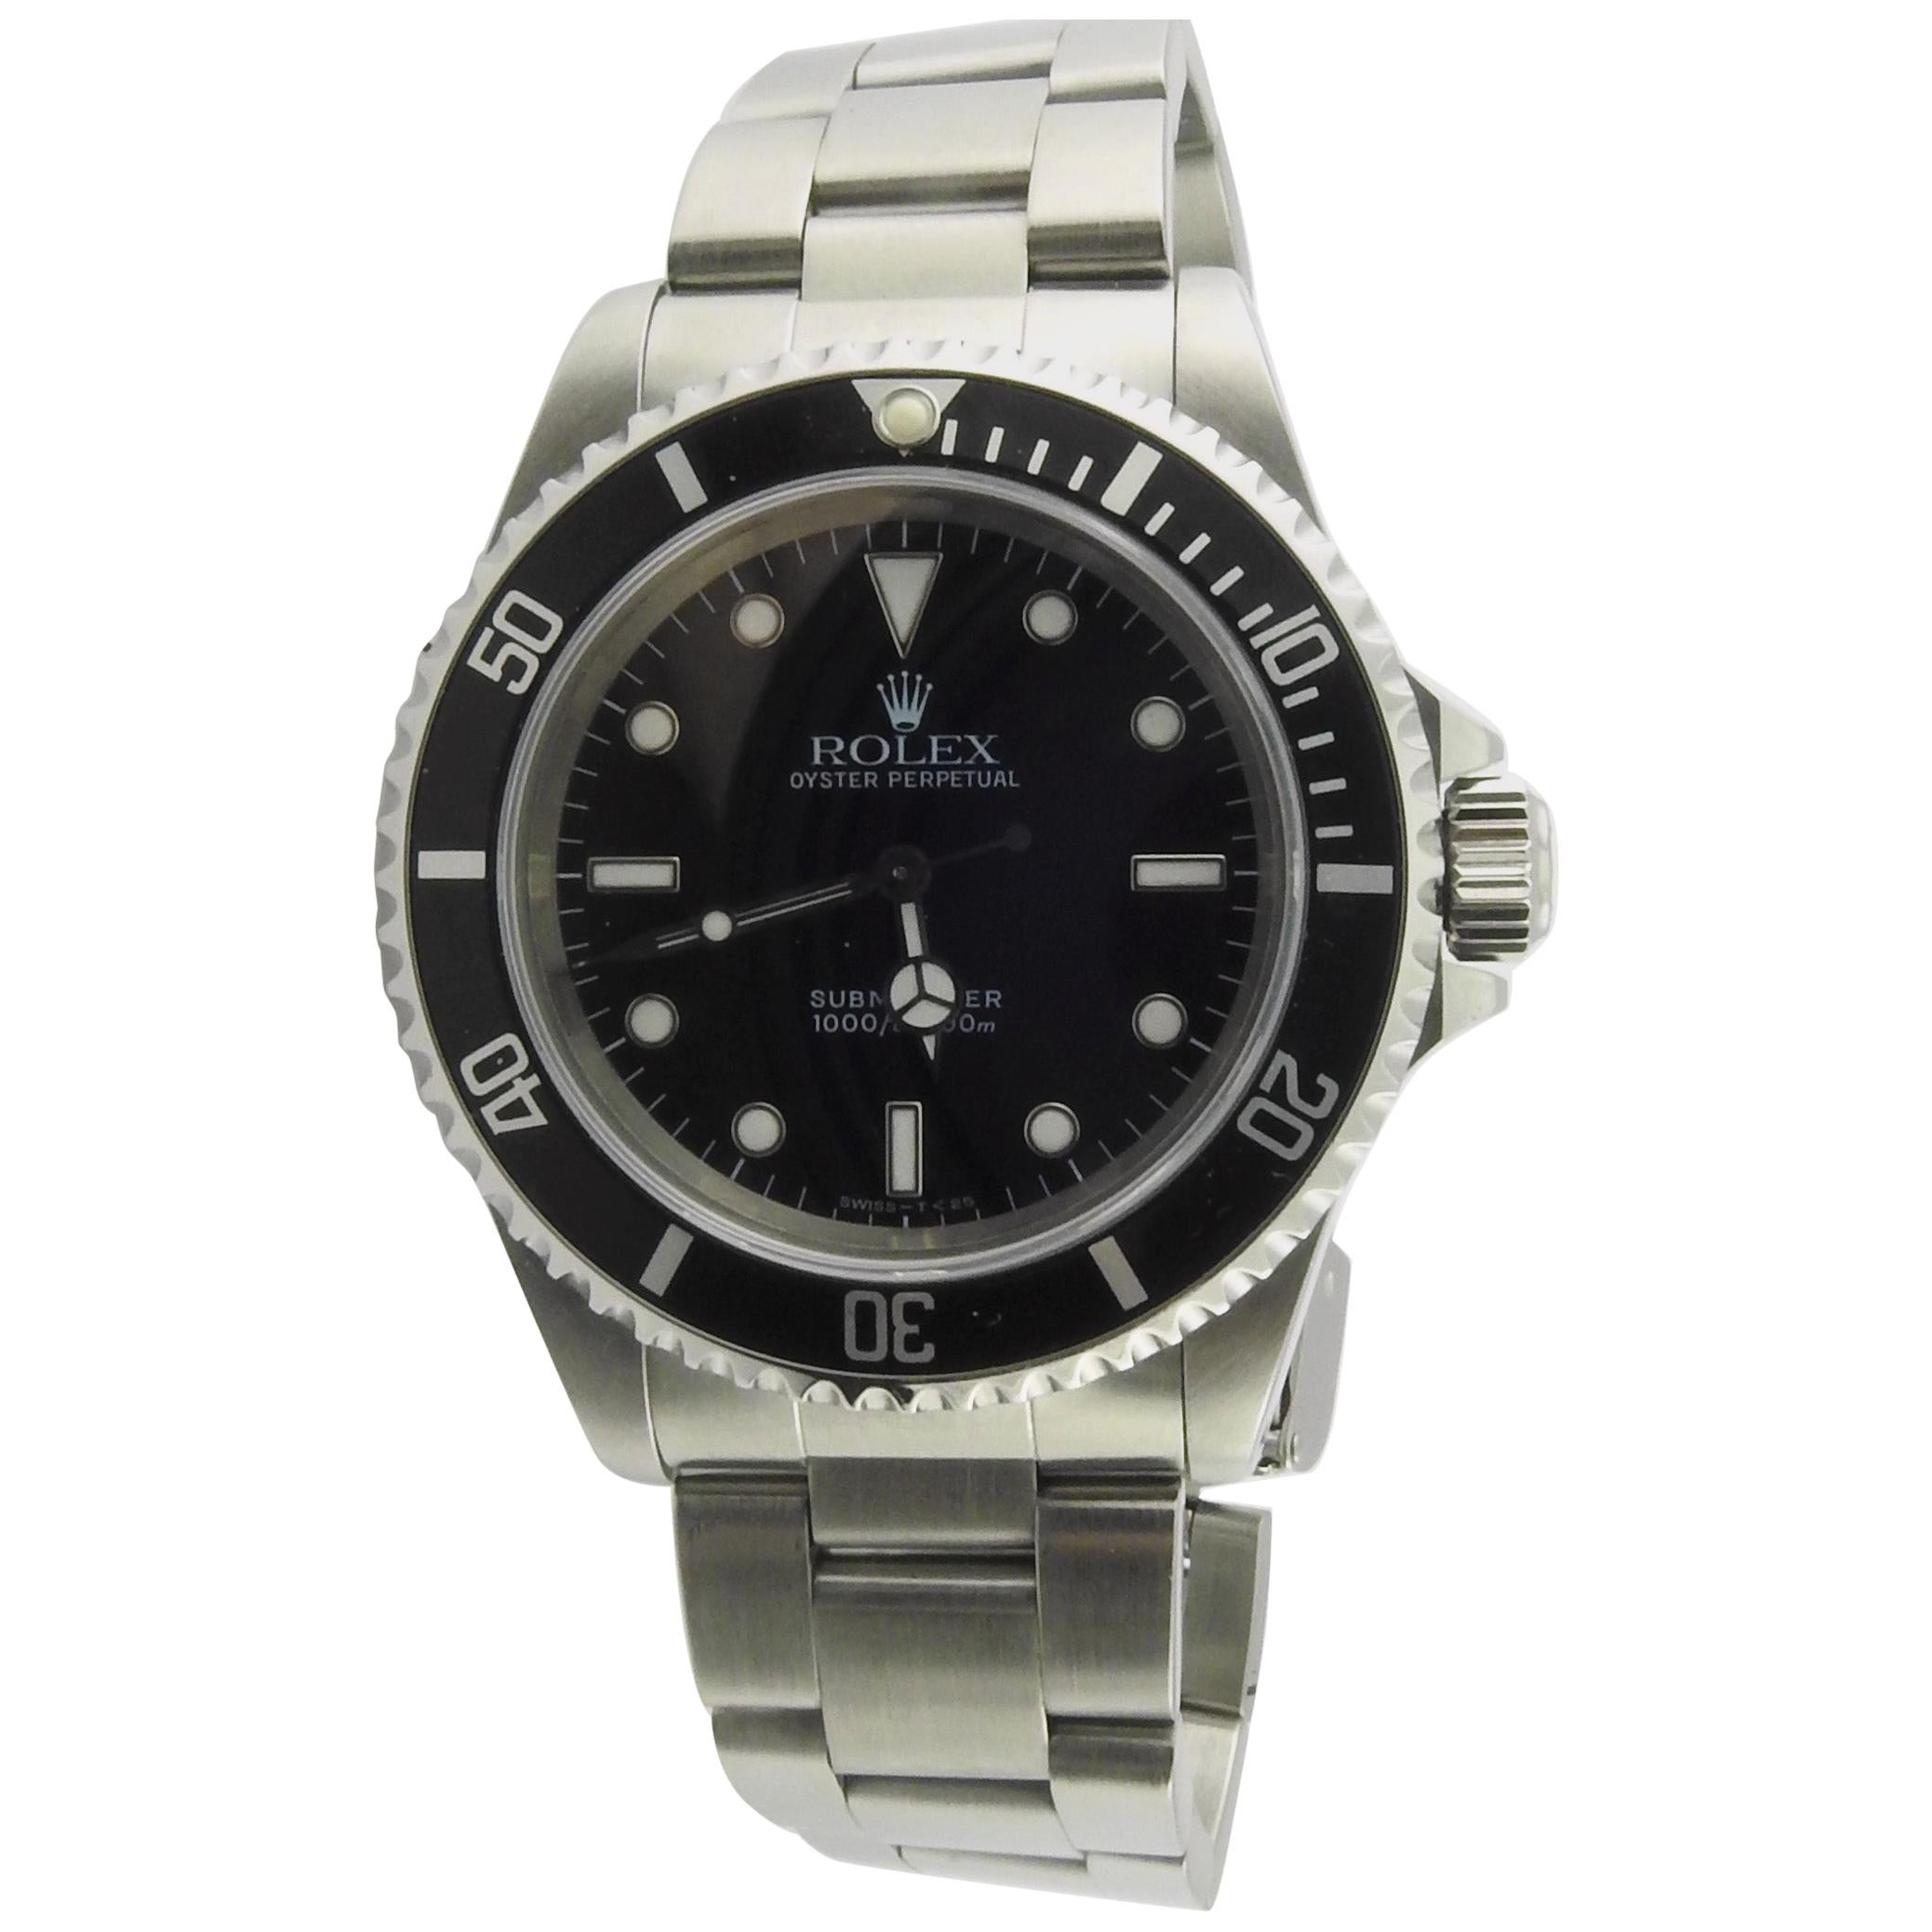 1997 Rolex Submariner Men's Watch 14060A Black Dial Black Bezel Box and Papers